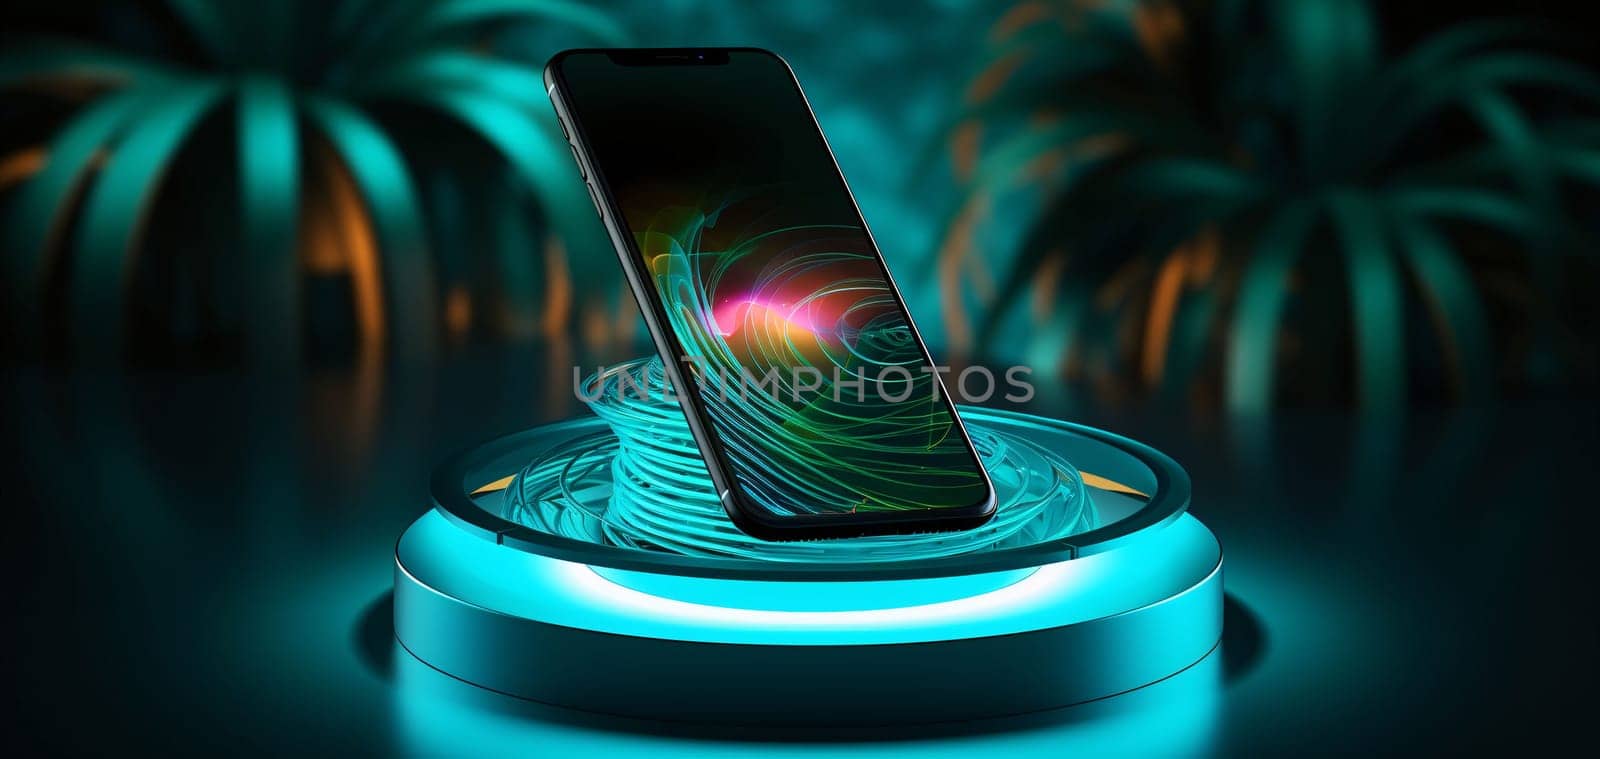 Smartphone with fingerprint scanner on display on dark background 3D rendering by ThemesS